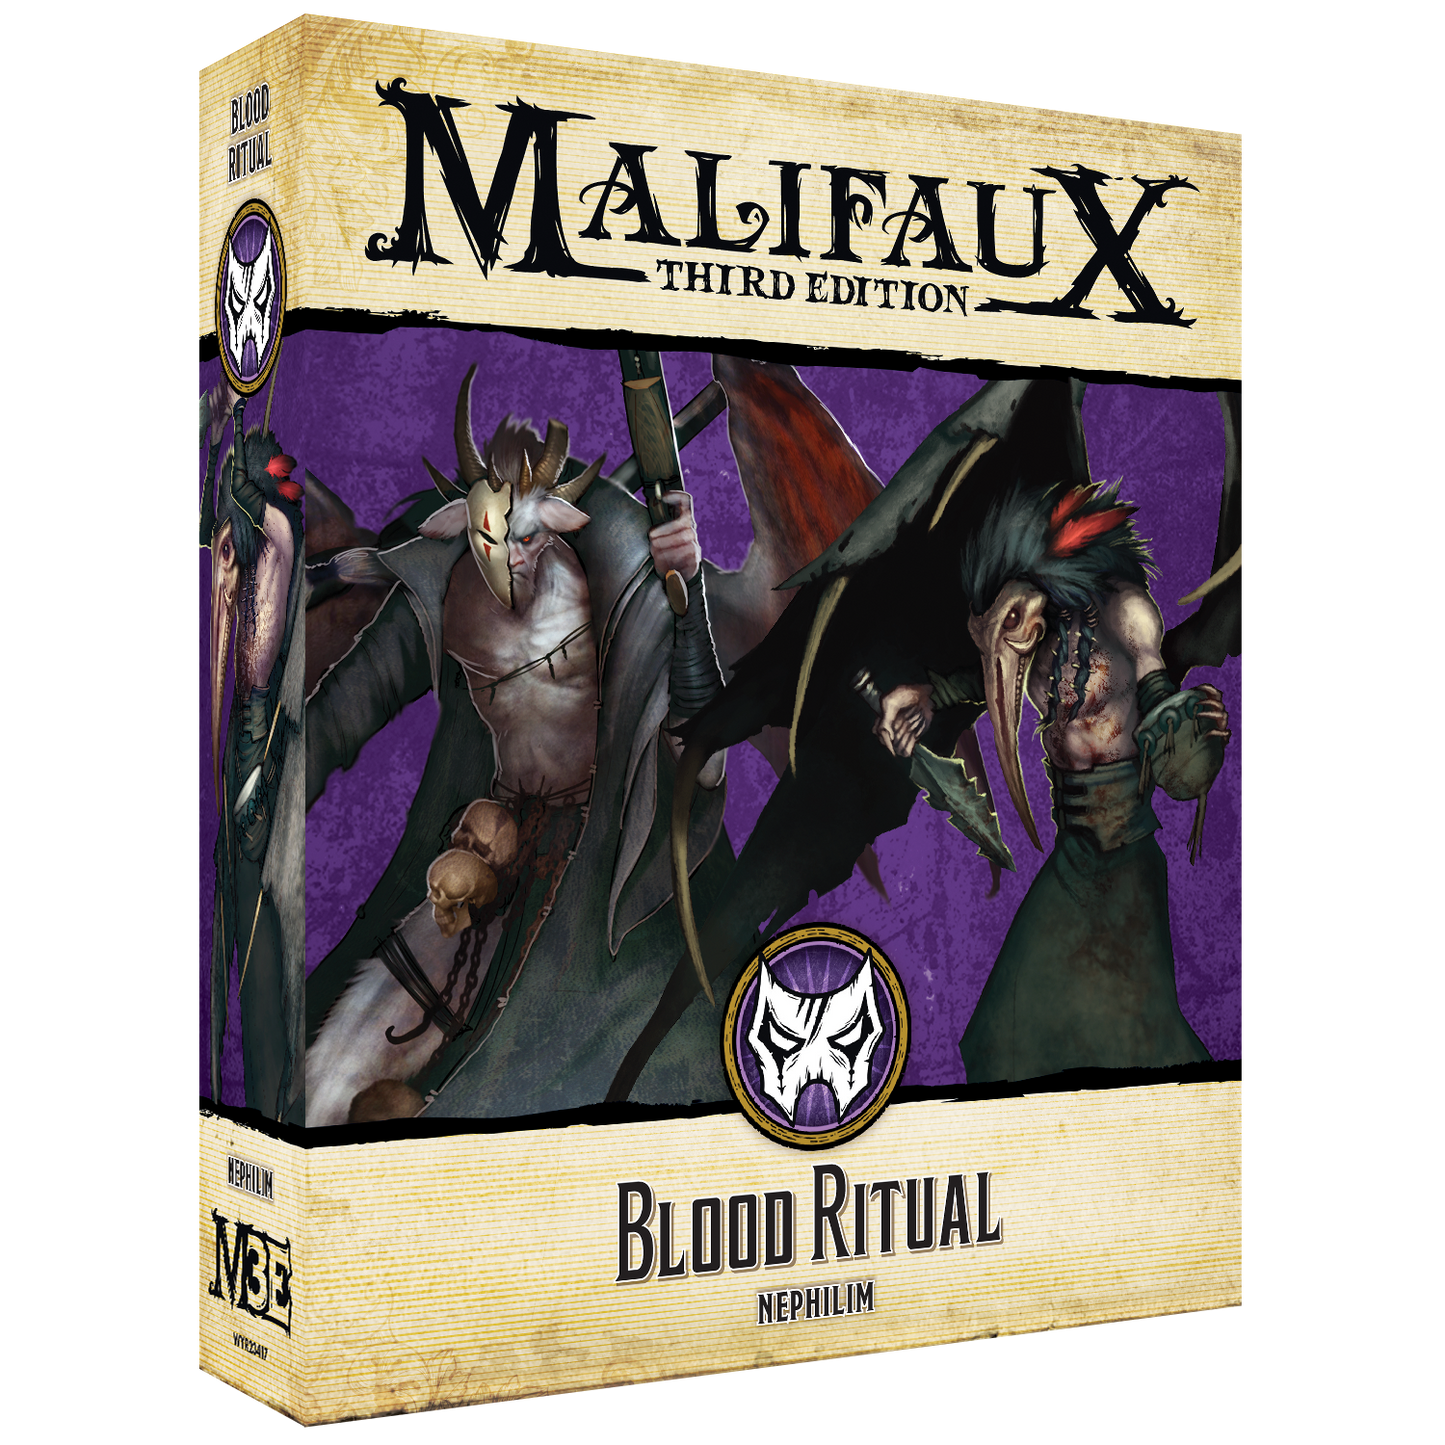 Blood Ritual - Wyrd Miniatures - Online Store